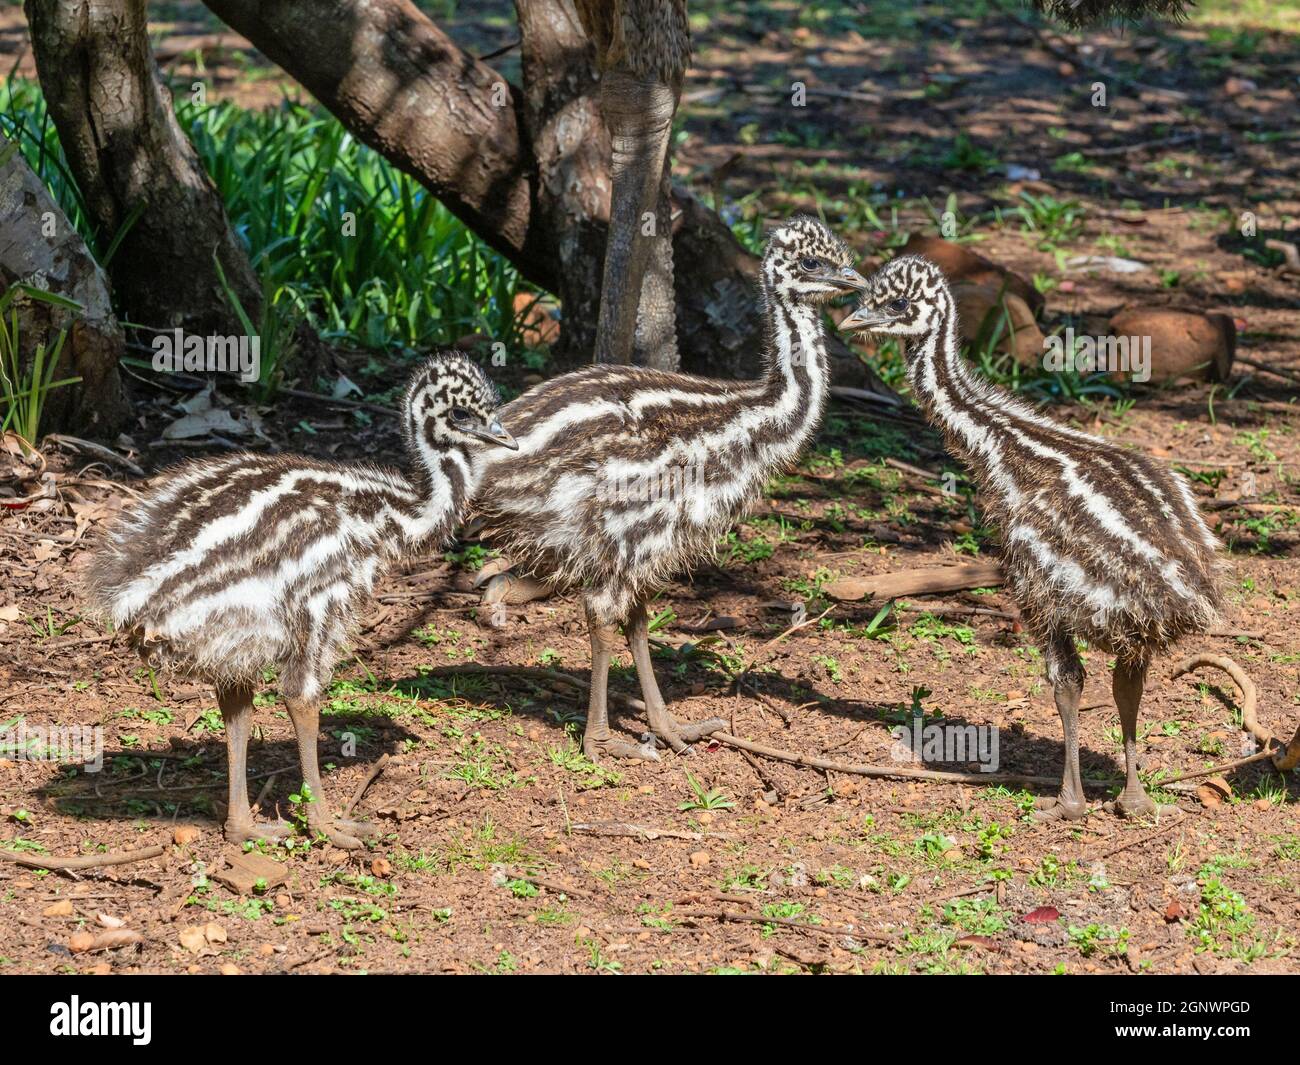 Three young emu chicks foraging for food. They are endemic to Australia where they are the largest native bird. Stock Photo